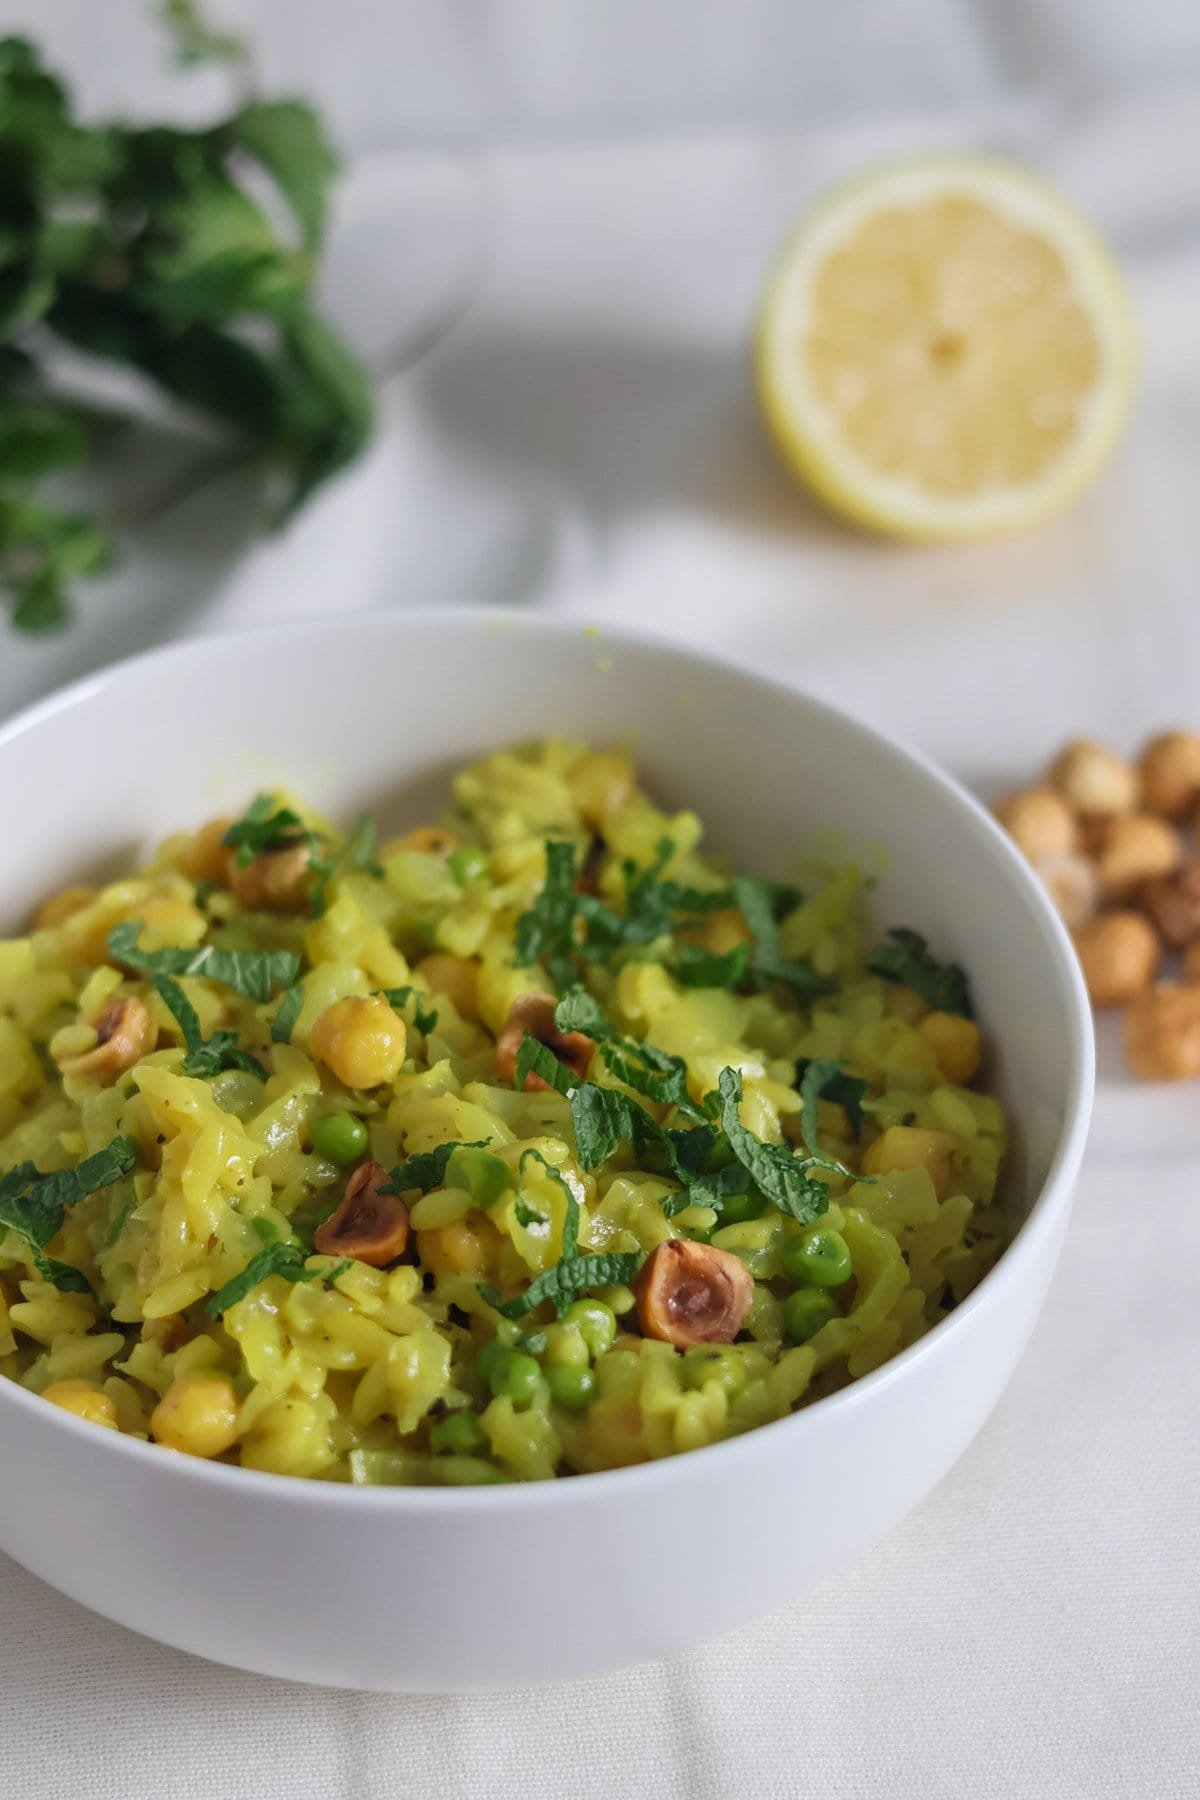 Orzo with chickpeas, lemon, fresh mint and hazelnuts in a white bowl with more hazelnuts, fresh mint and lemon in de background.